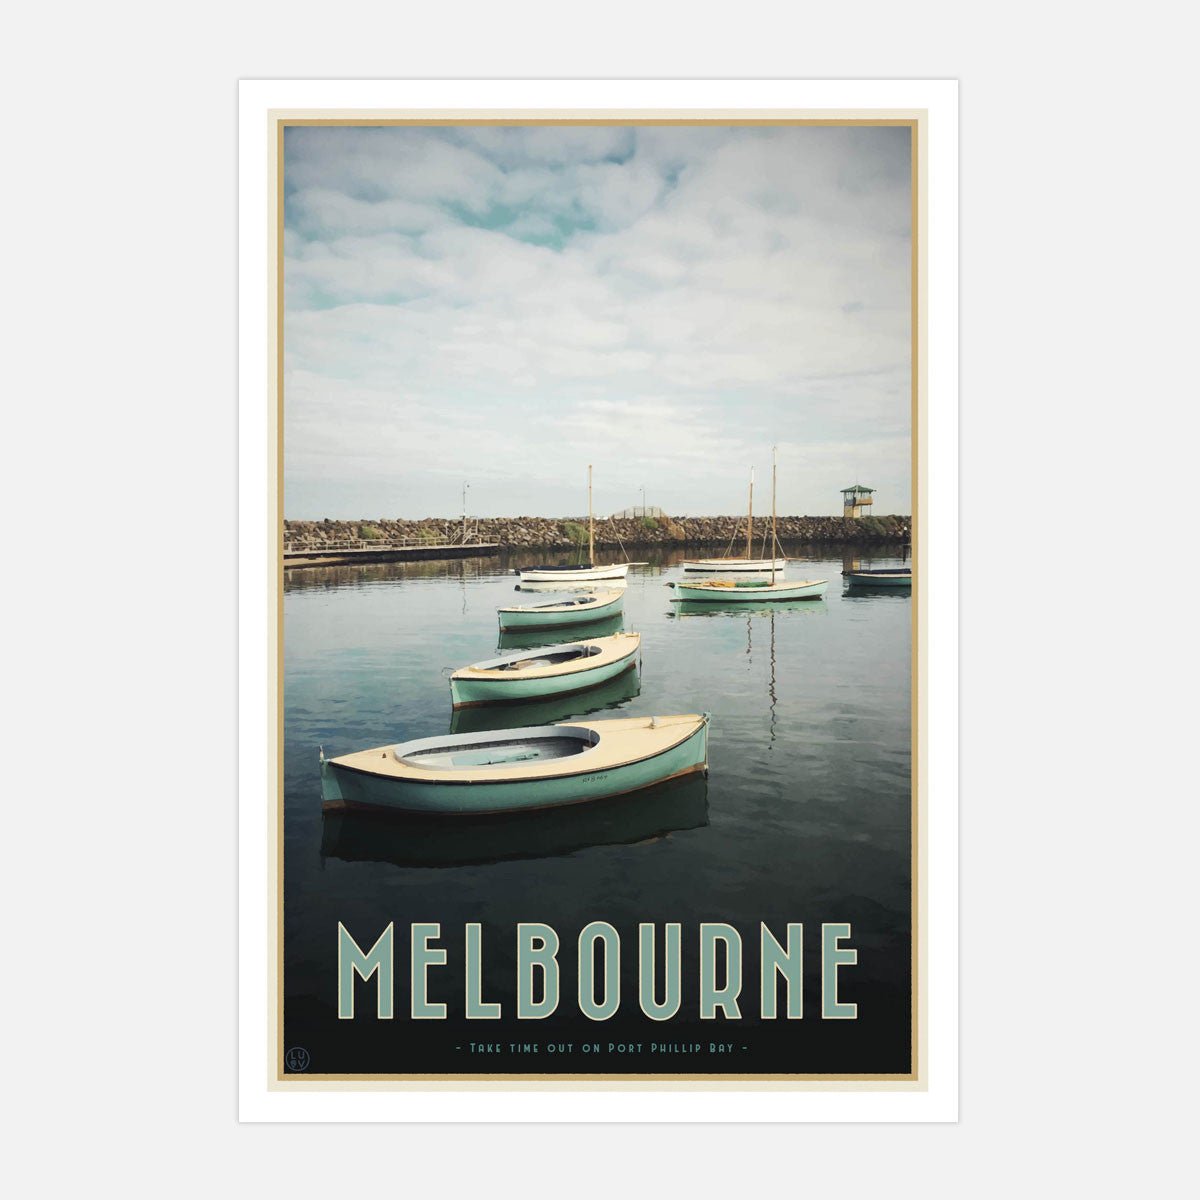 Melbourne St Kilda travel vintage style poster by places we luv